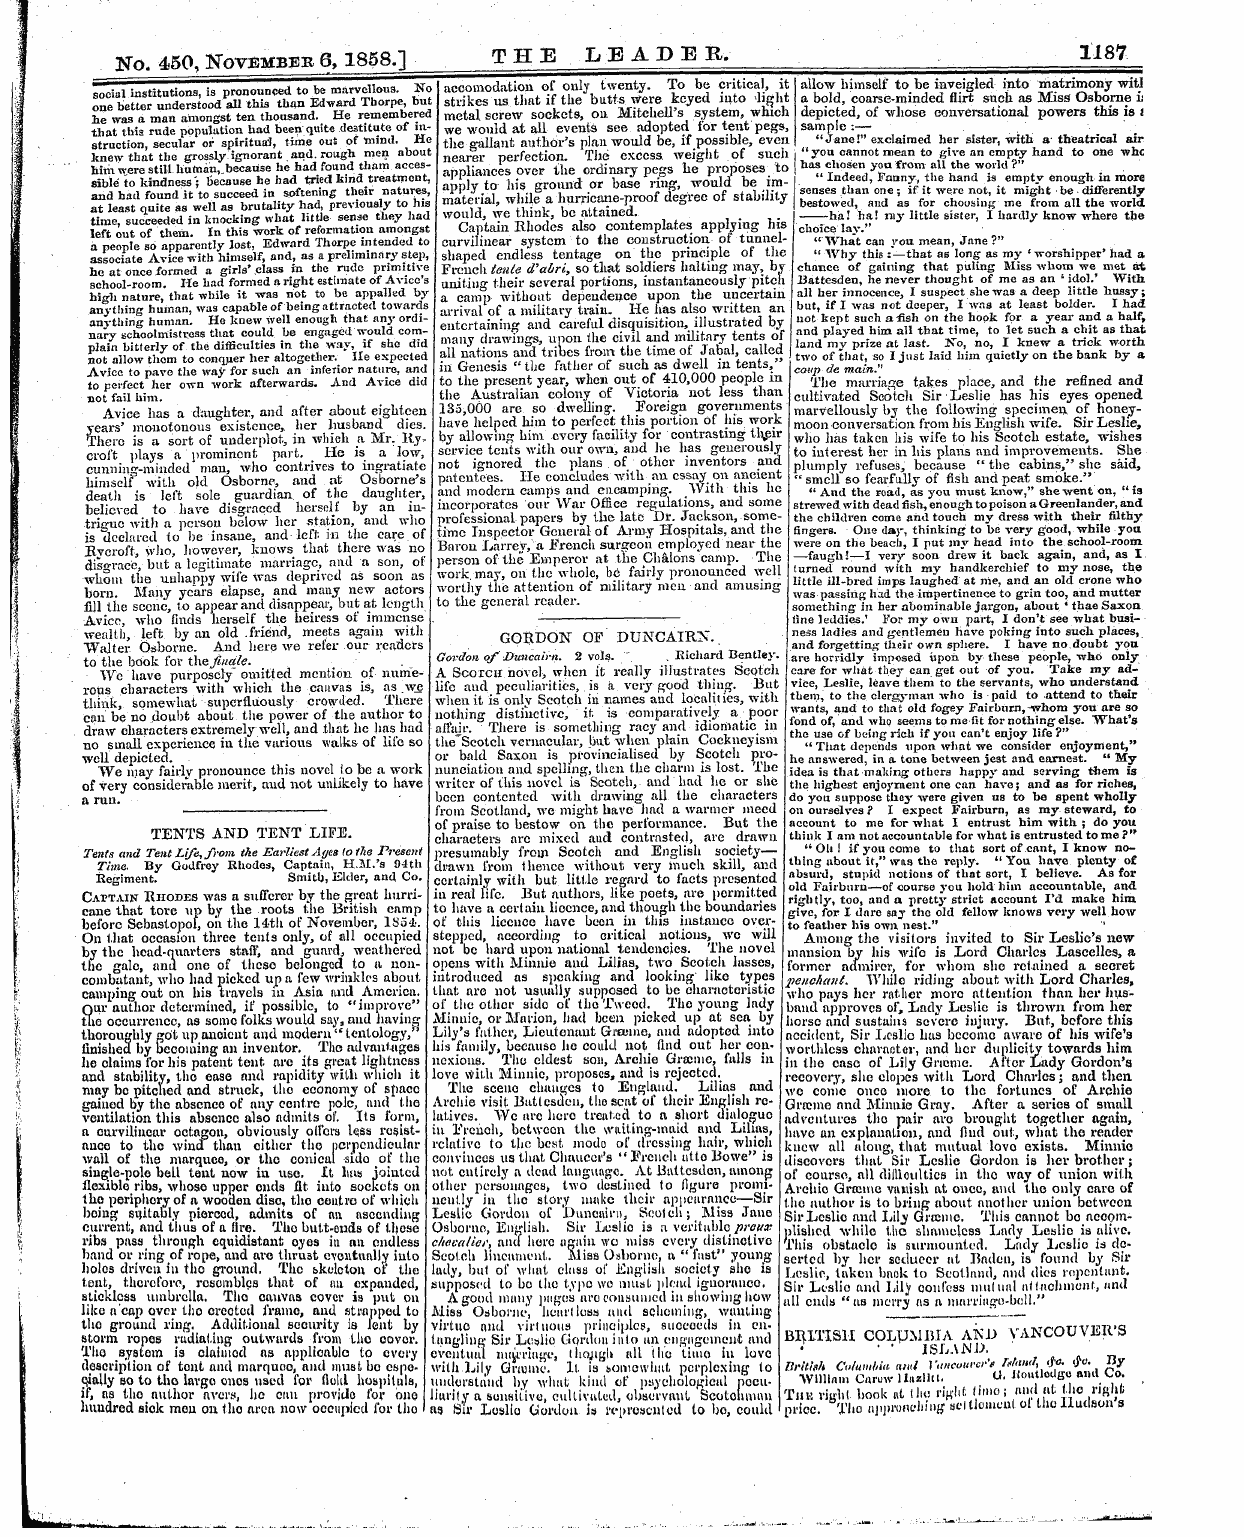 Leader (1850-1860): jS F Y, 1st edition: 11